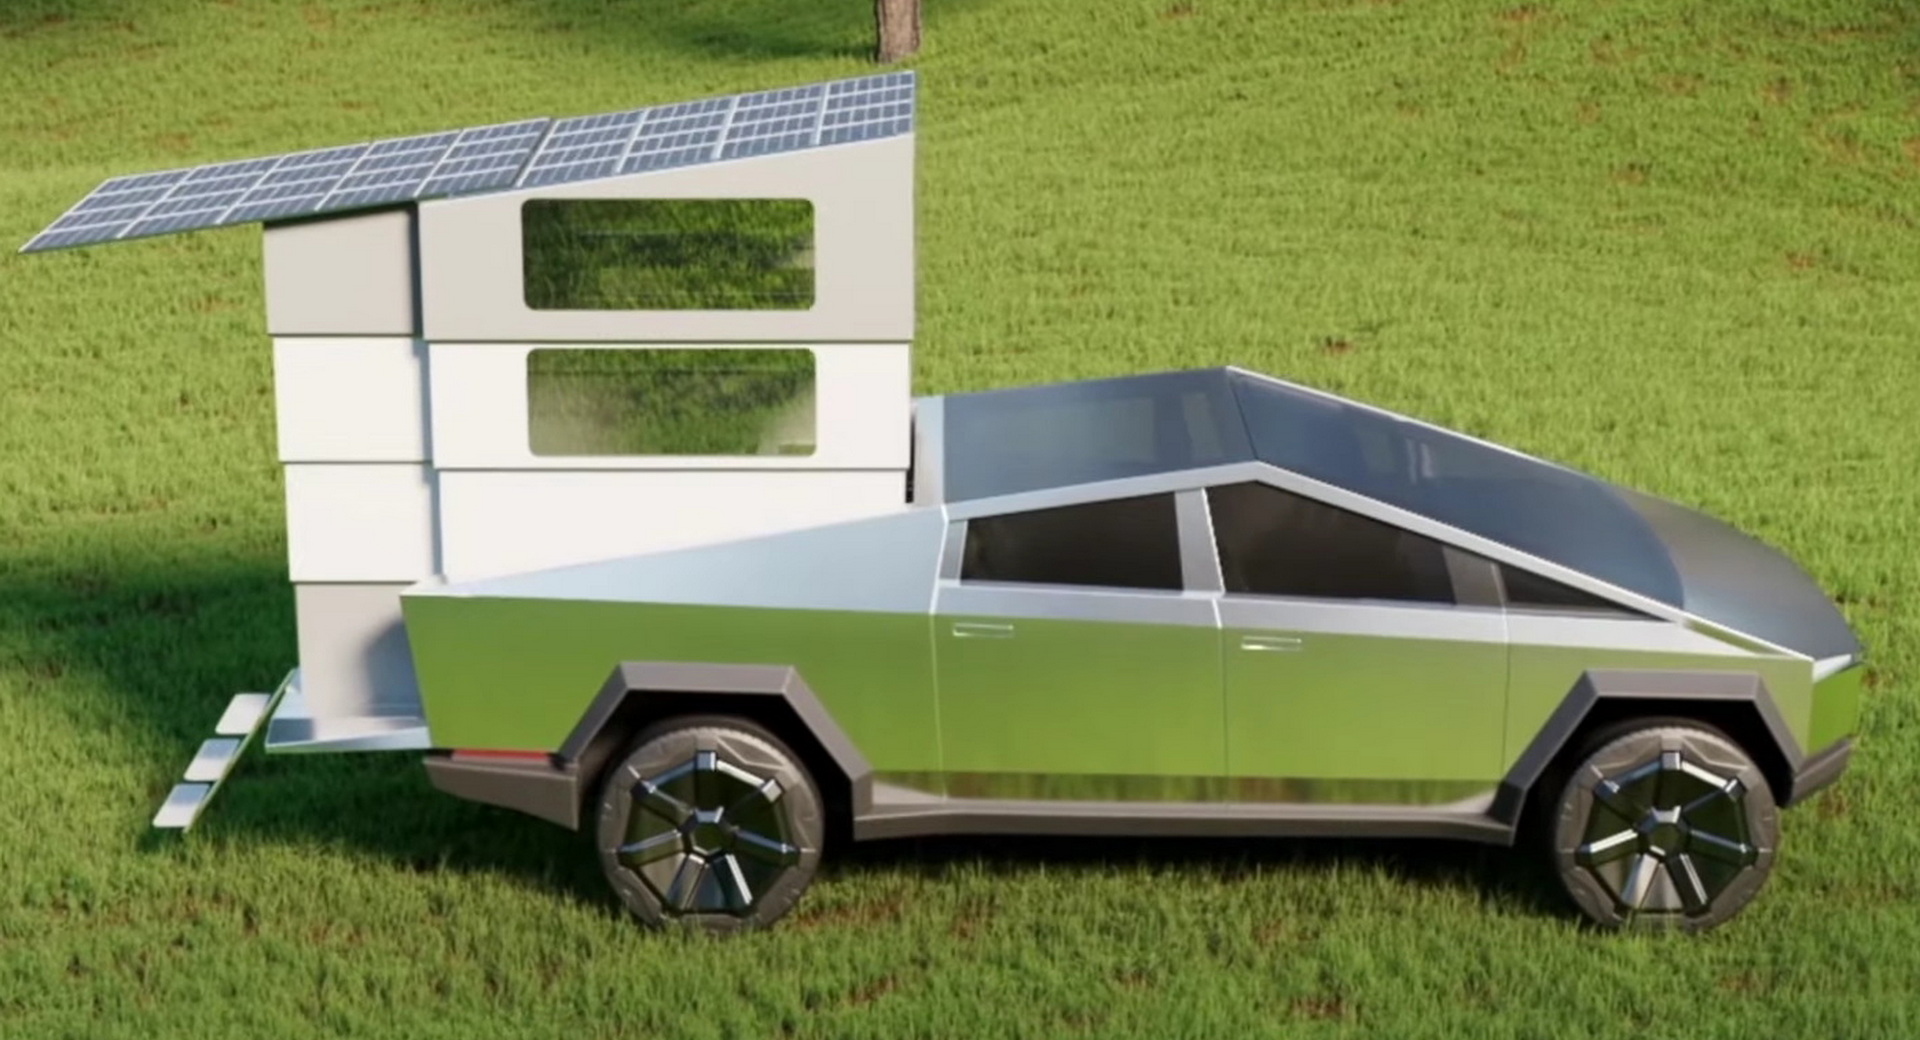 CyberLandr Is A Pop-Up Camper That Fits On The Tesla Cybertruck’s Bed